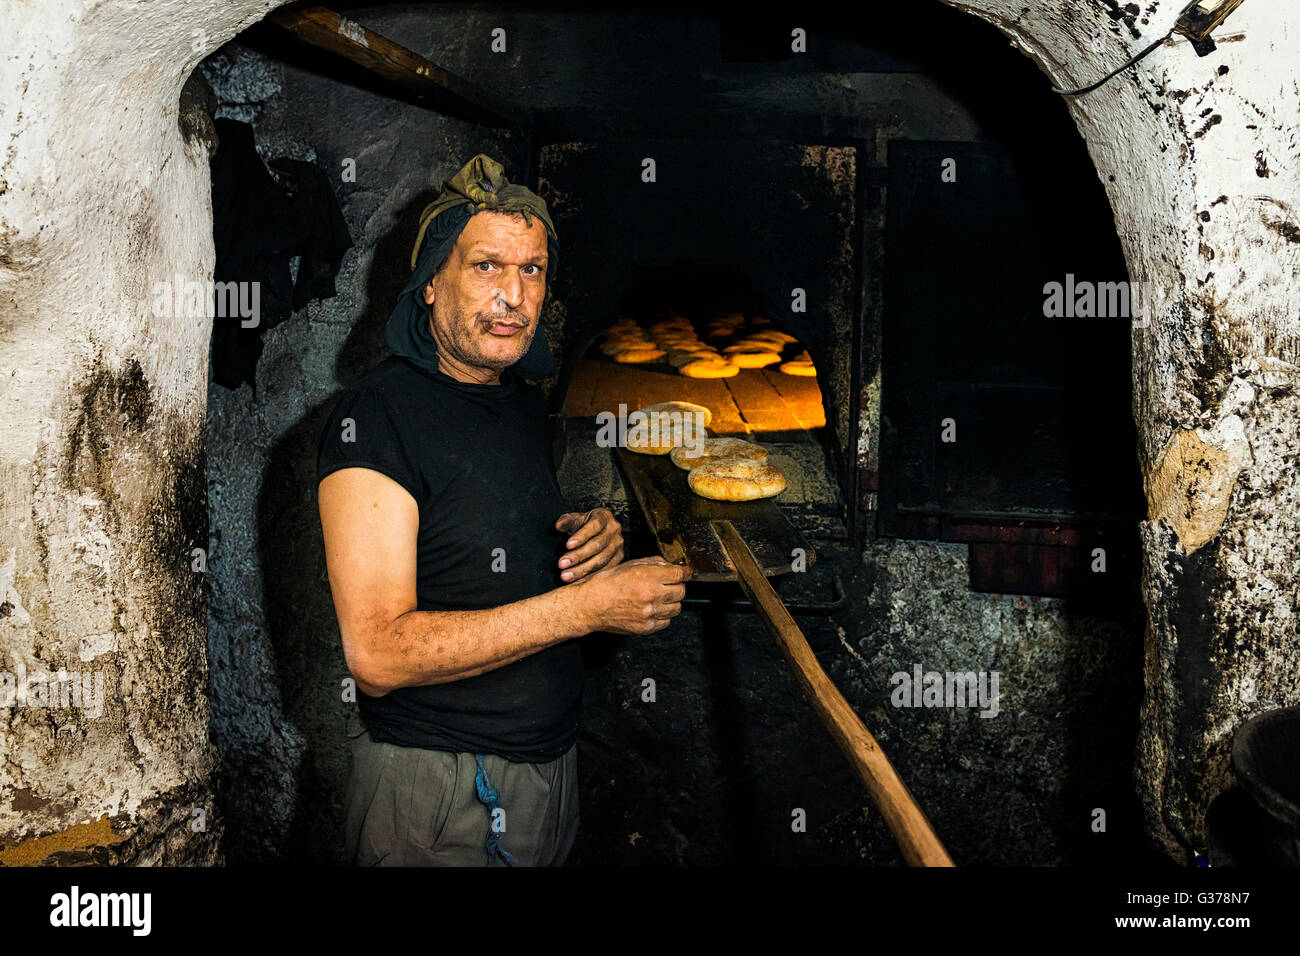 Fez, Morocco - April 11, 2016: Portrait of a baker standing in front of a traditional oven baking bread in Fez, Morocco. Stock Photo